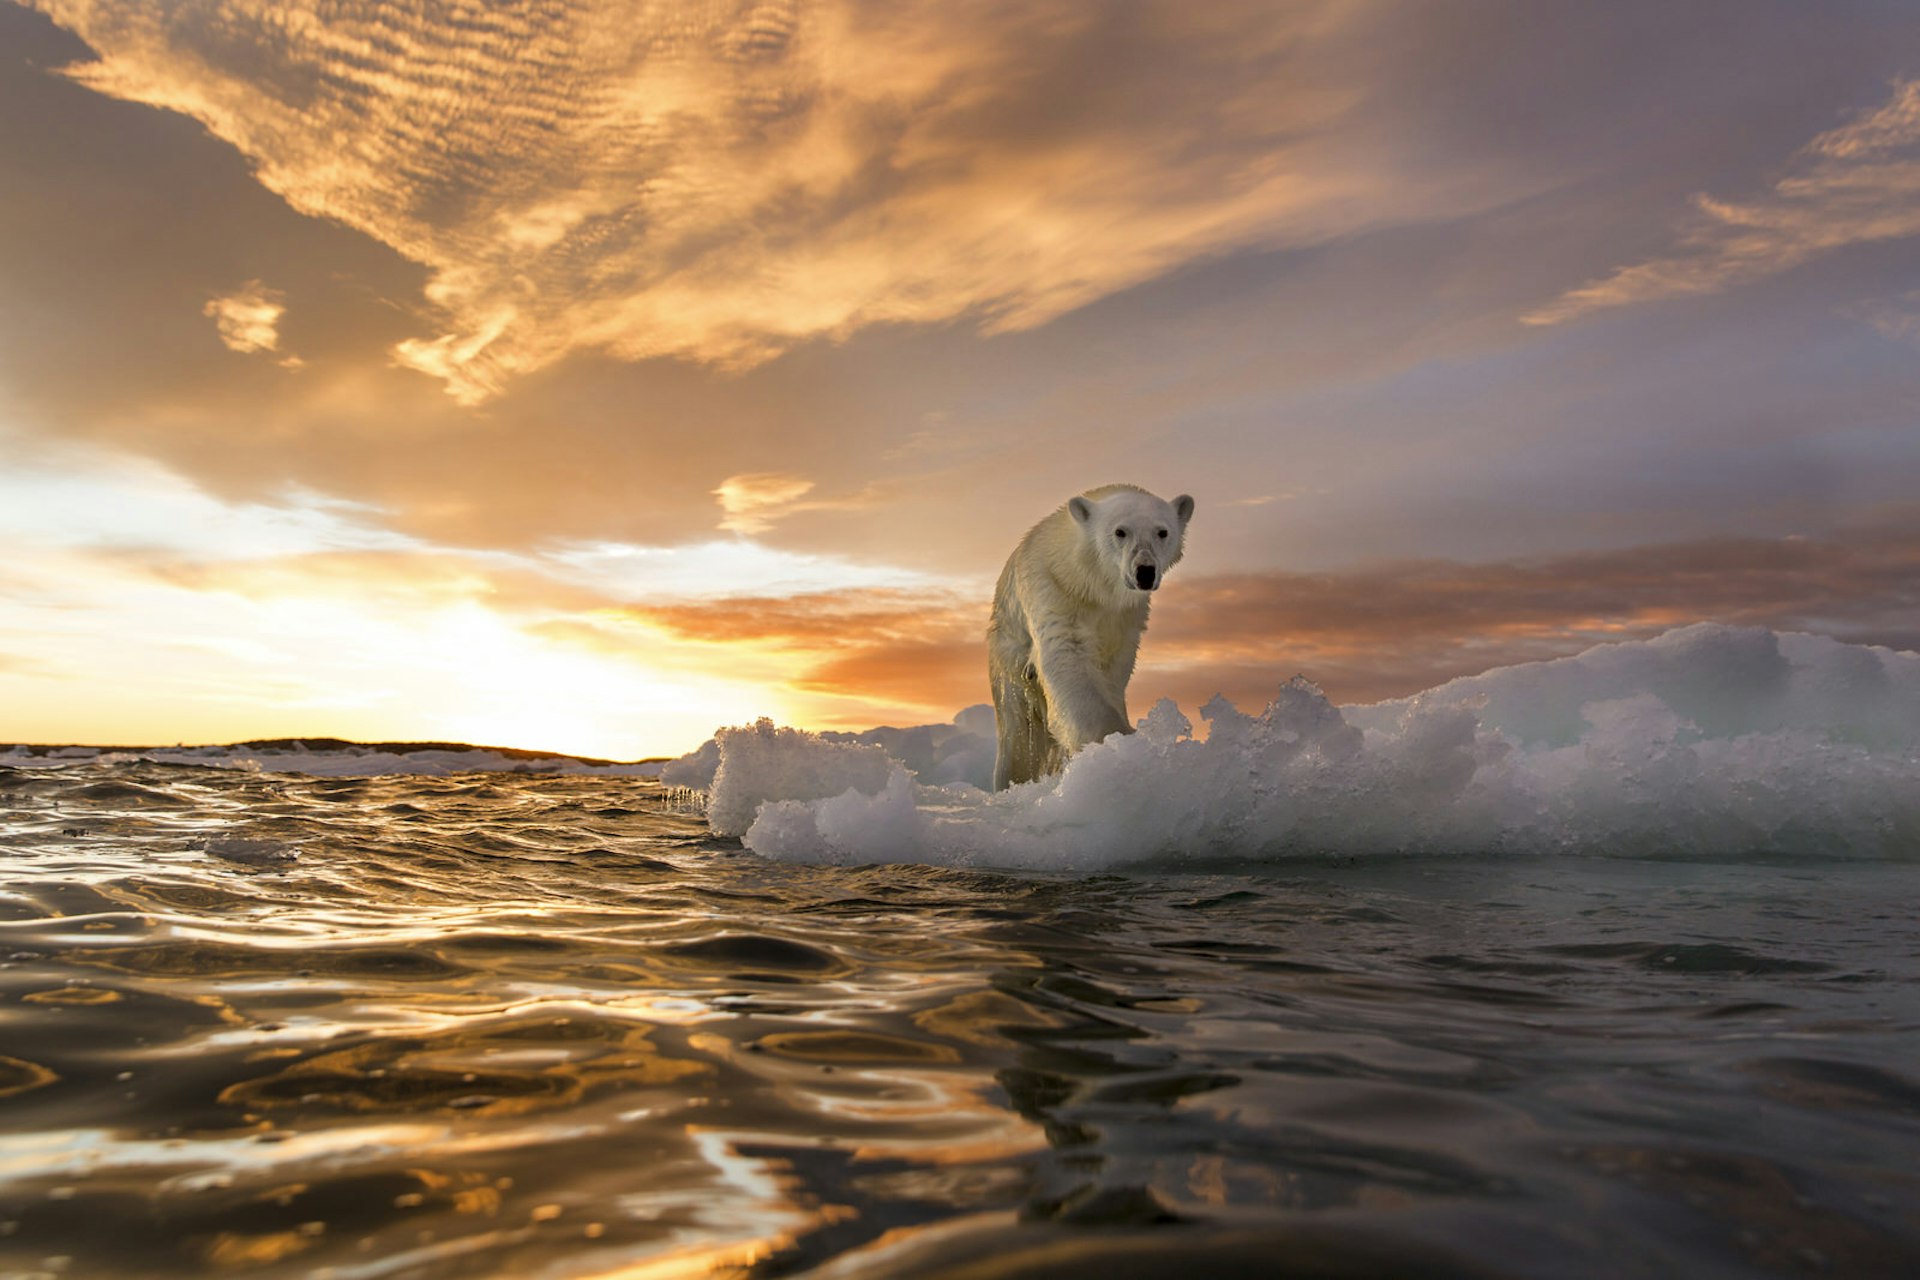 A polar bear stands on a lump of melting sea ice as the sun sets on Repulse Bay, Canada © Paul Souders / Getty Images